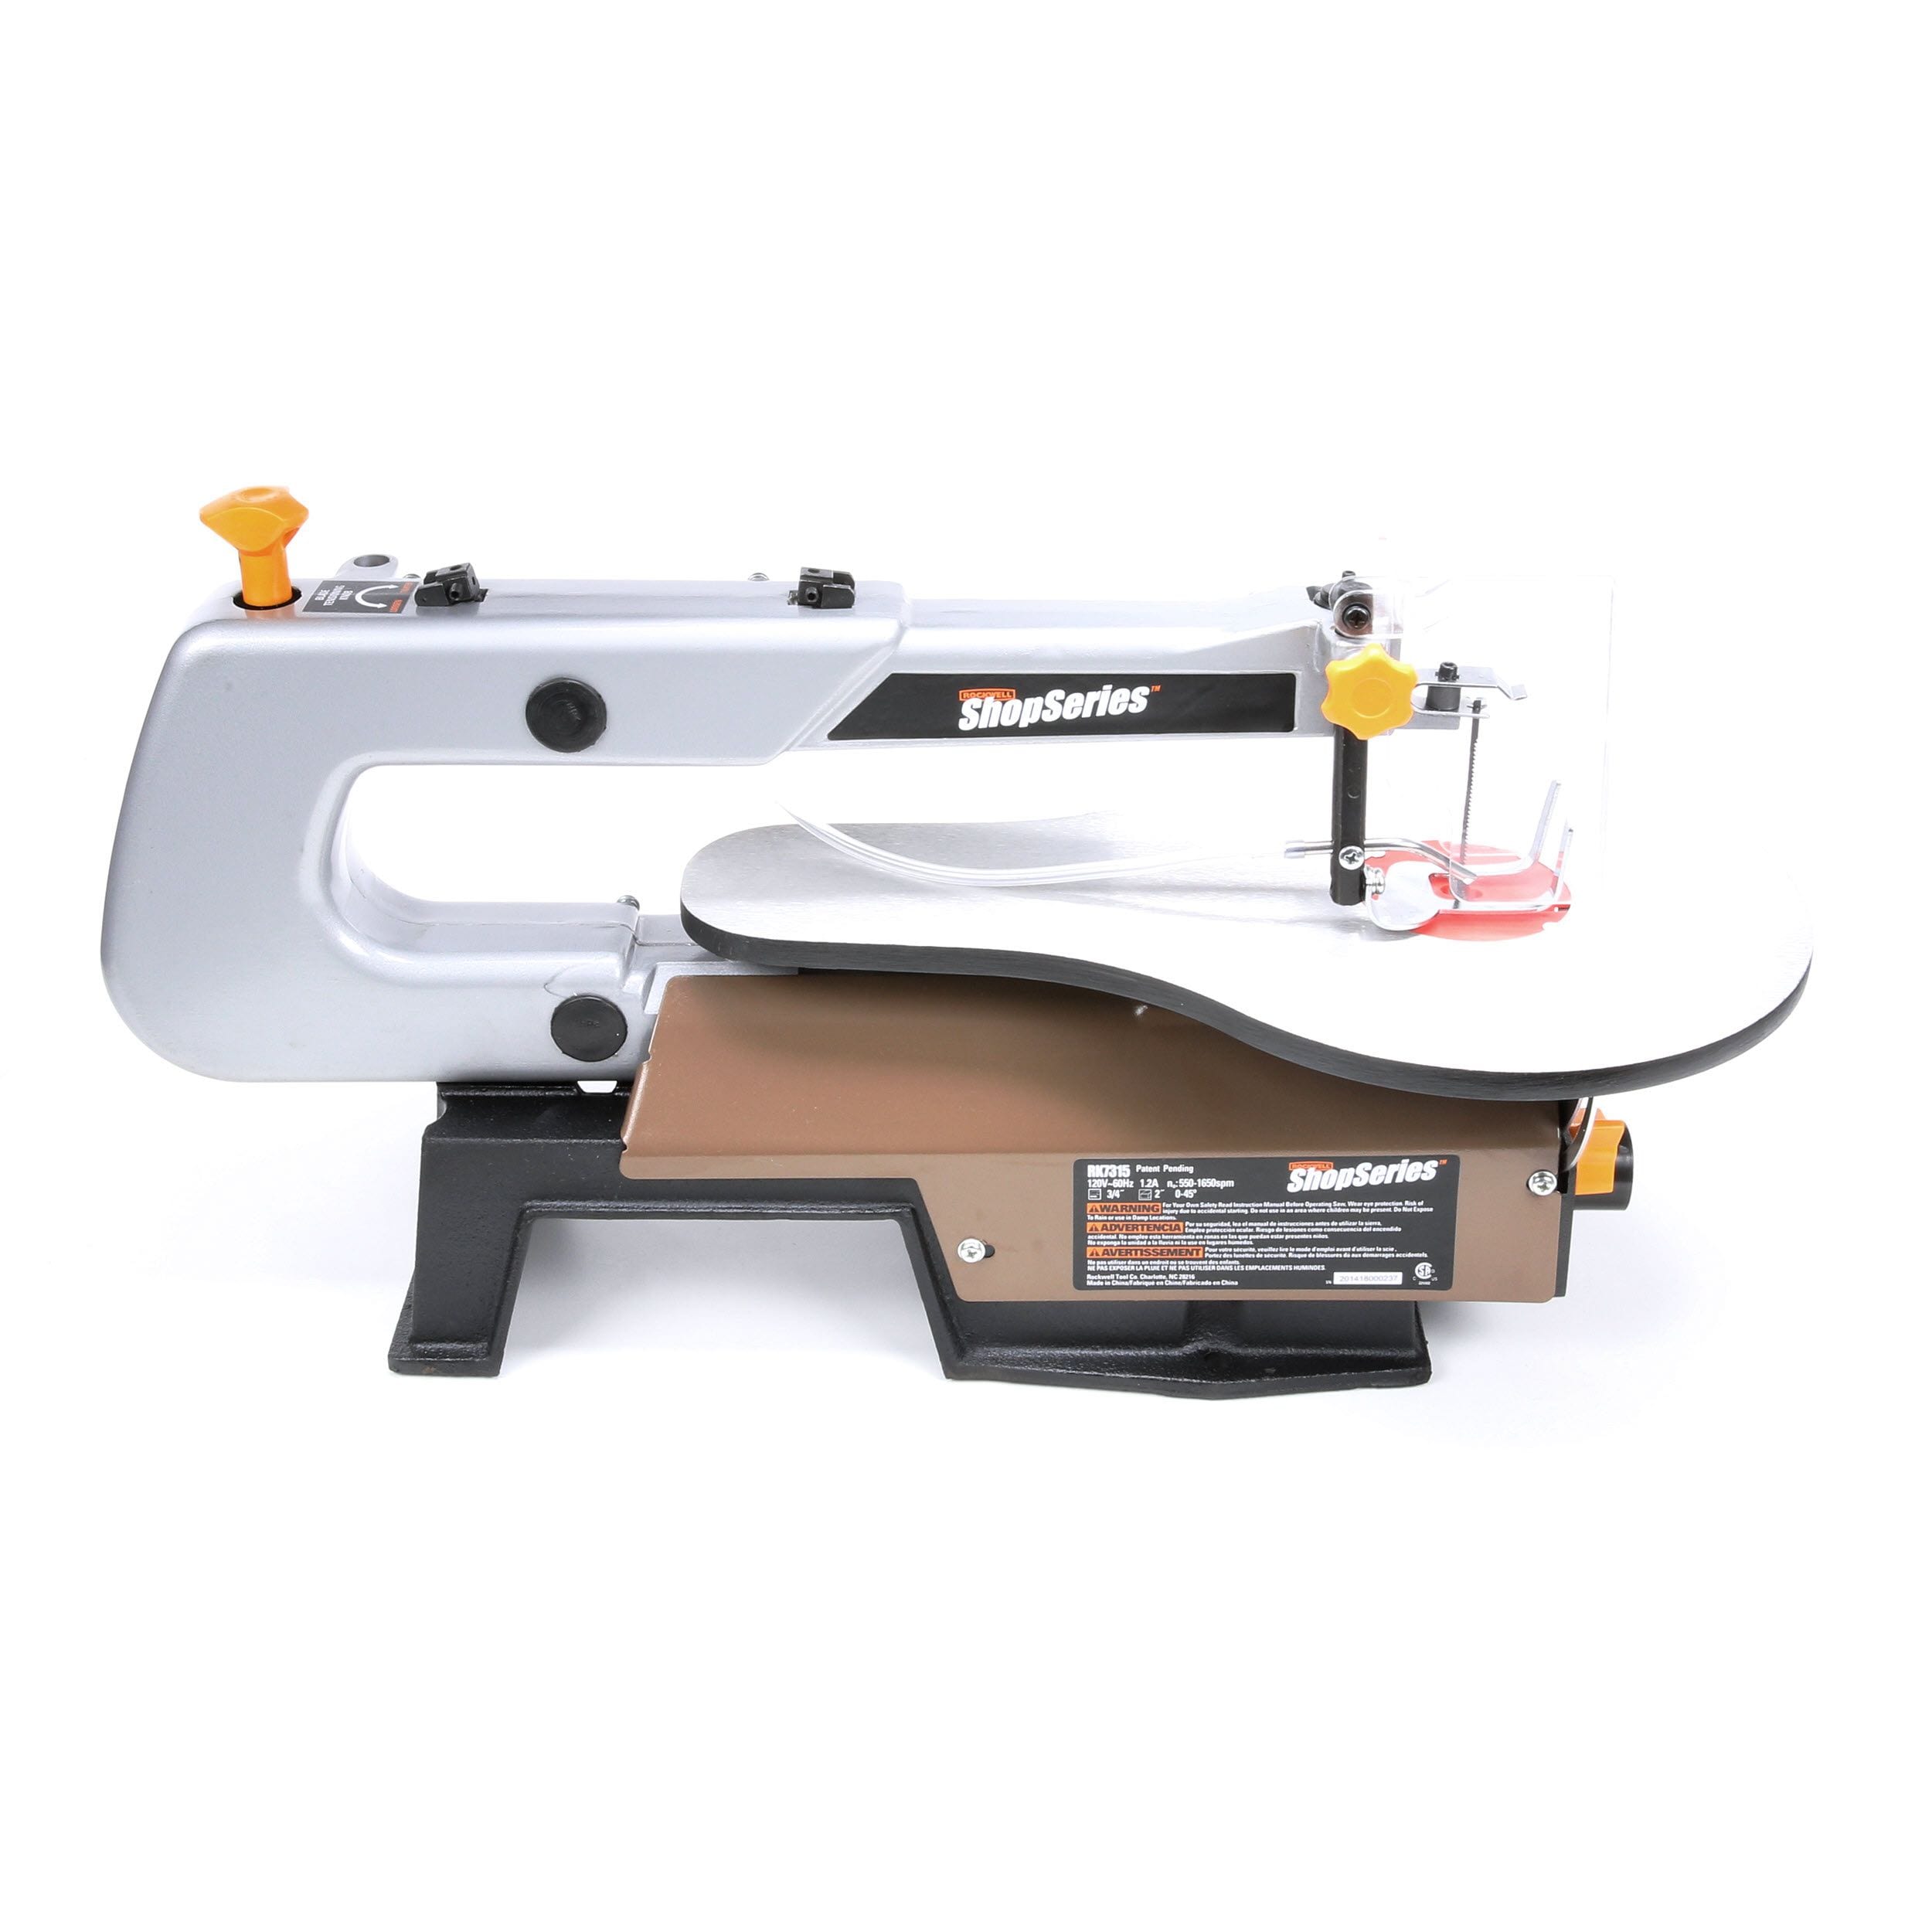 Shop Series By Rockwell 16-in Variable Speed Corded Scroll Saw 